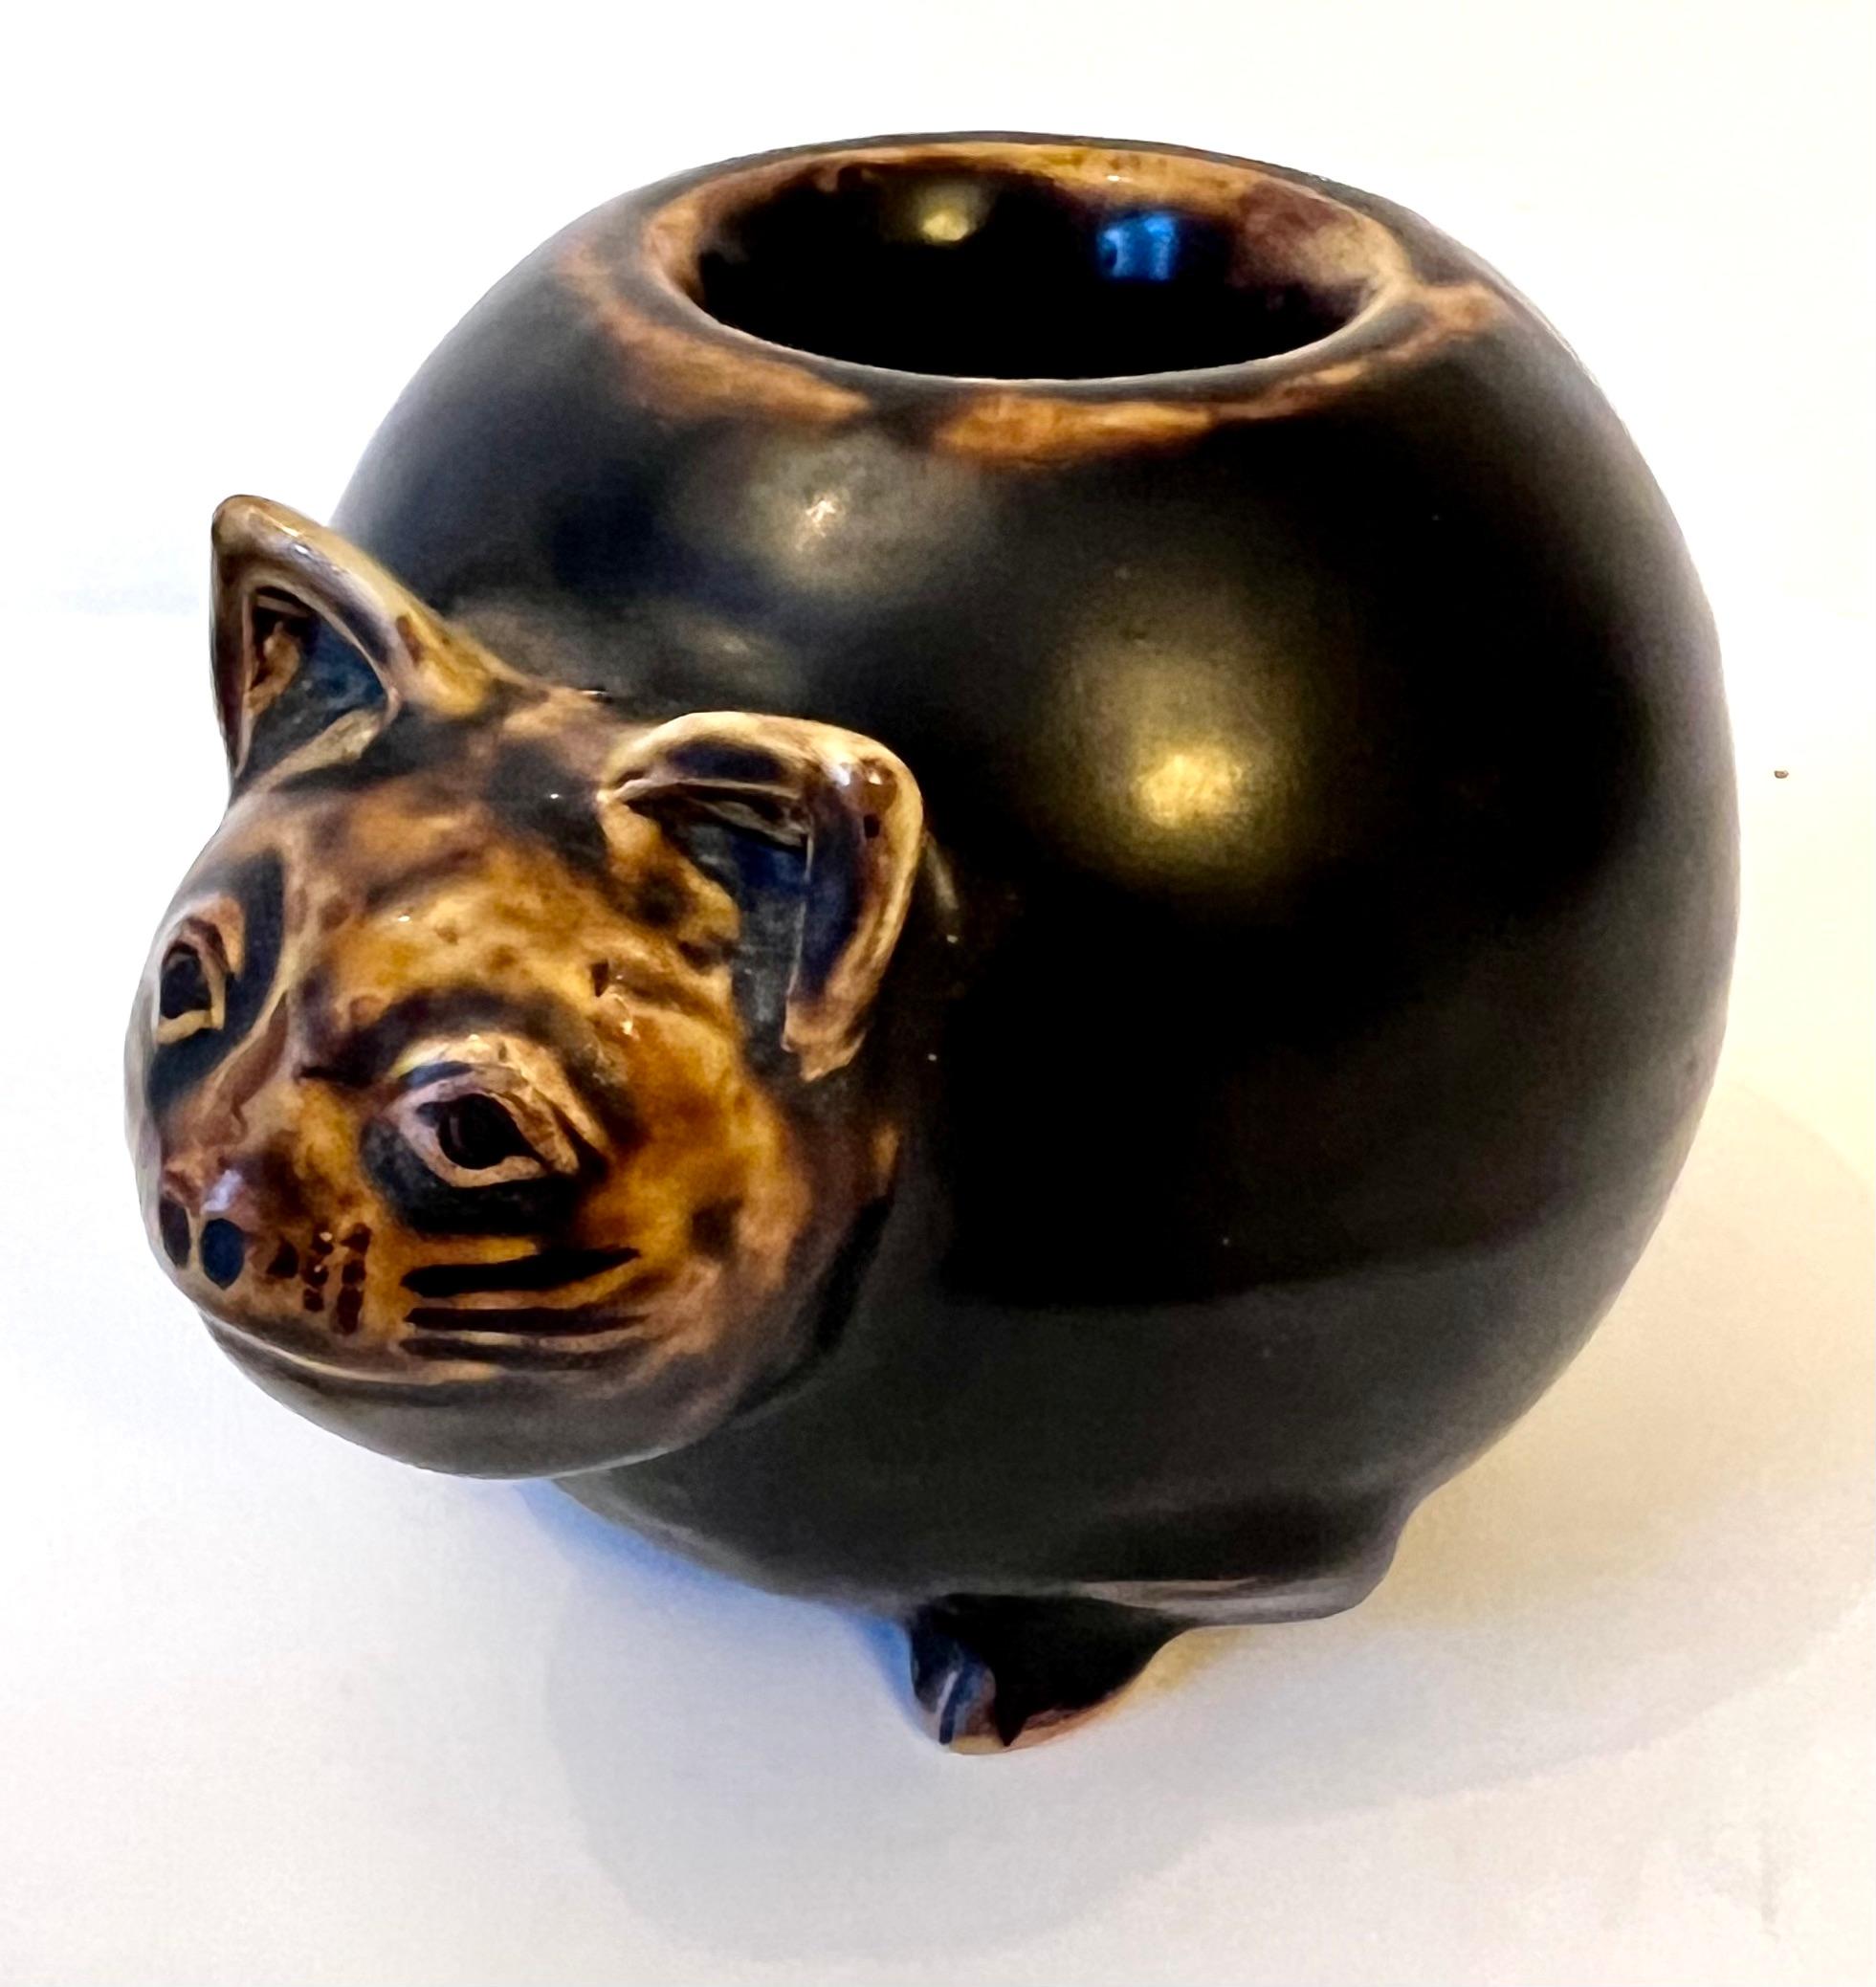 Unique and delicate - a terracotta ceramic cat acquired in Paris France.  
the piece is a compliment to many settings and would work well in a Childs space, or someone who is very fond of felines. 

The body has a bell inside (this I believe is to